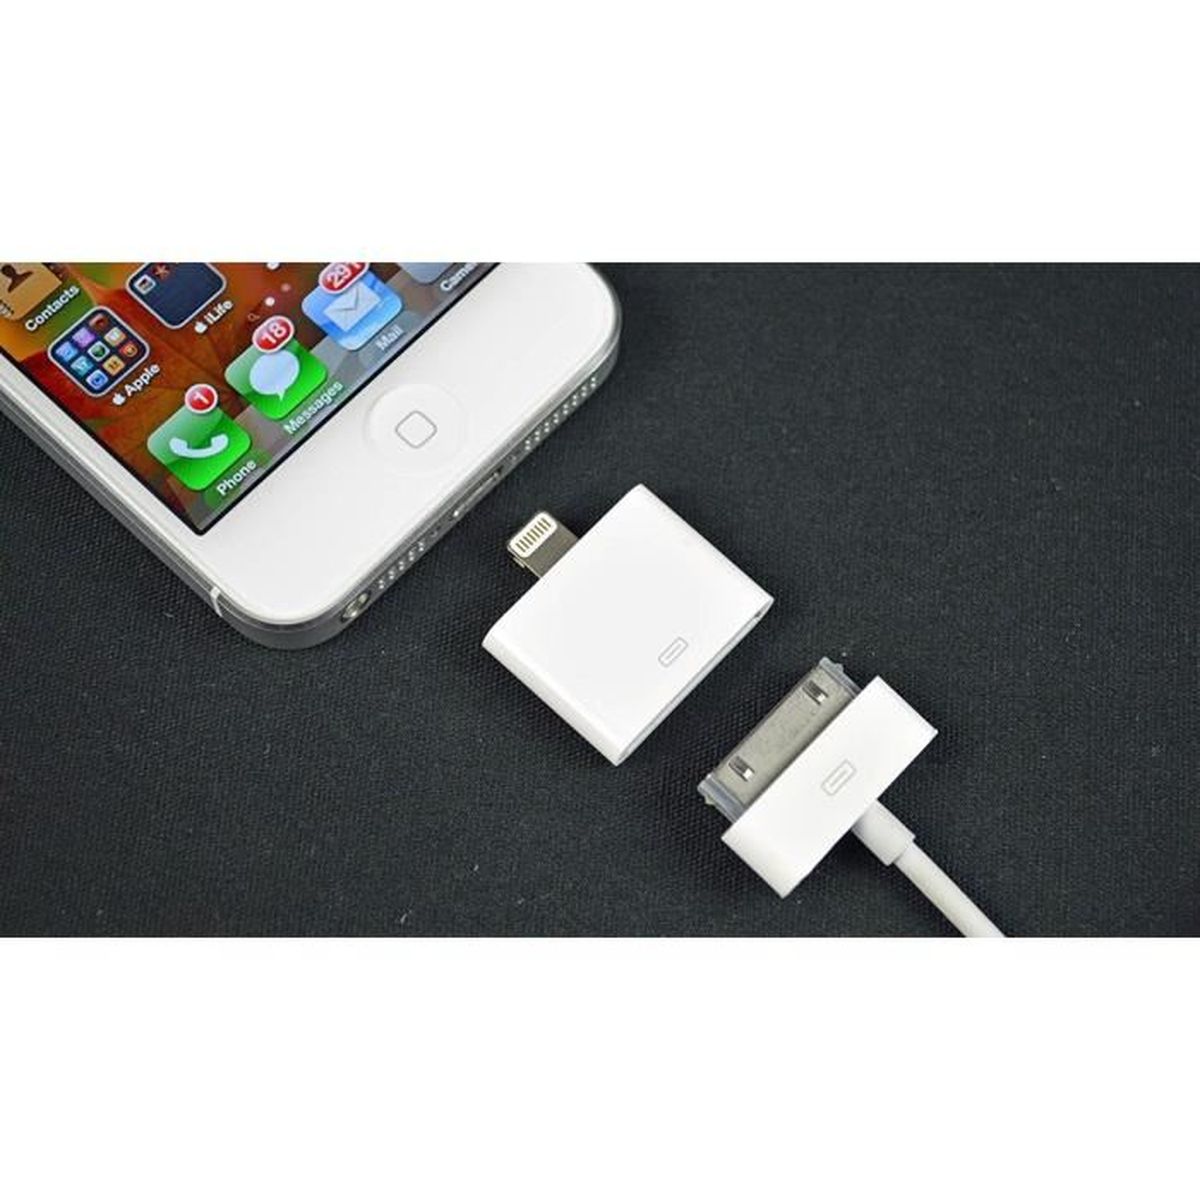 Adaptateur Lightning vers iPhone 30 broches, mini USB et micro USB -  Mobile-Store